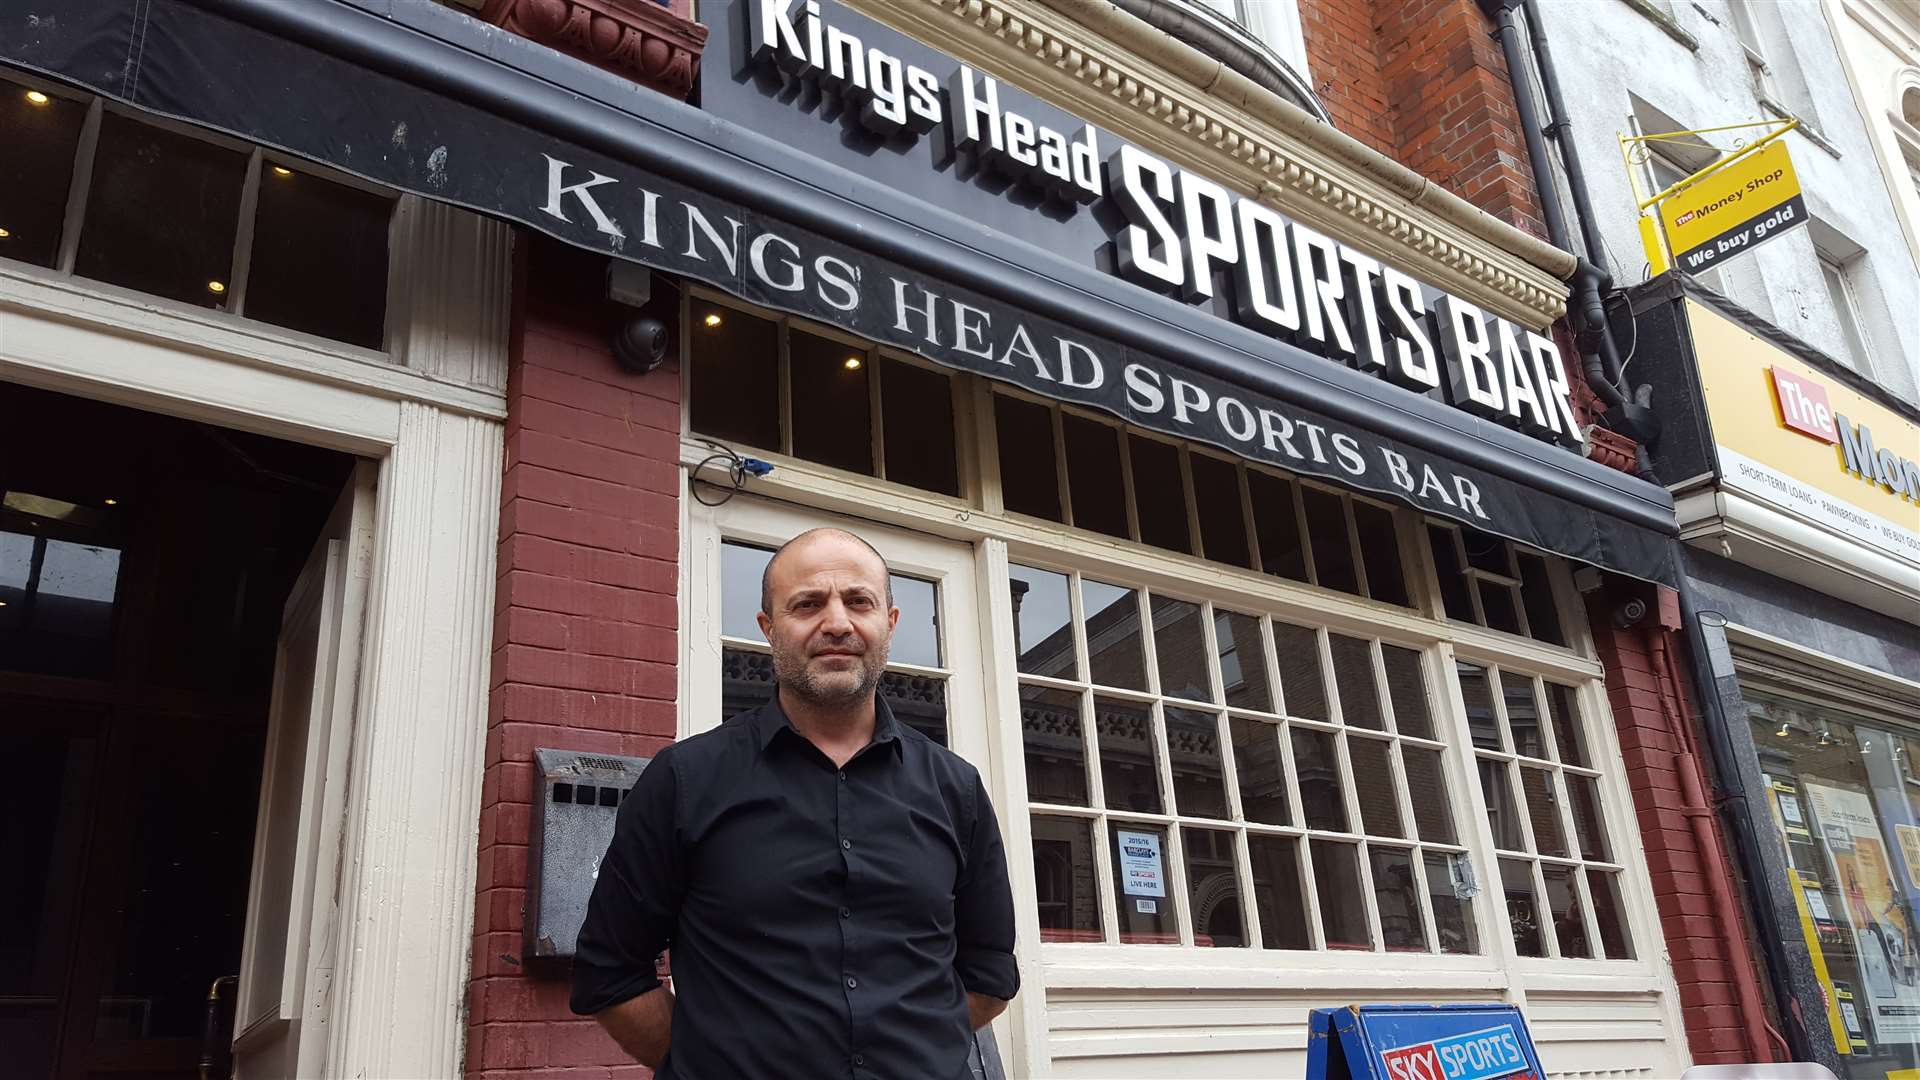 Ismail Sucu, landlord at the Kings Head in Gravesend